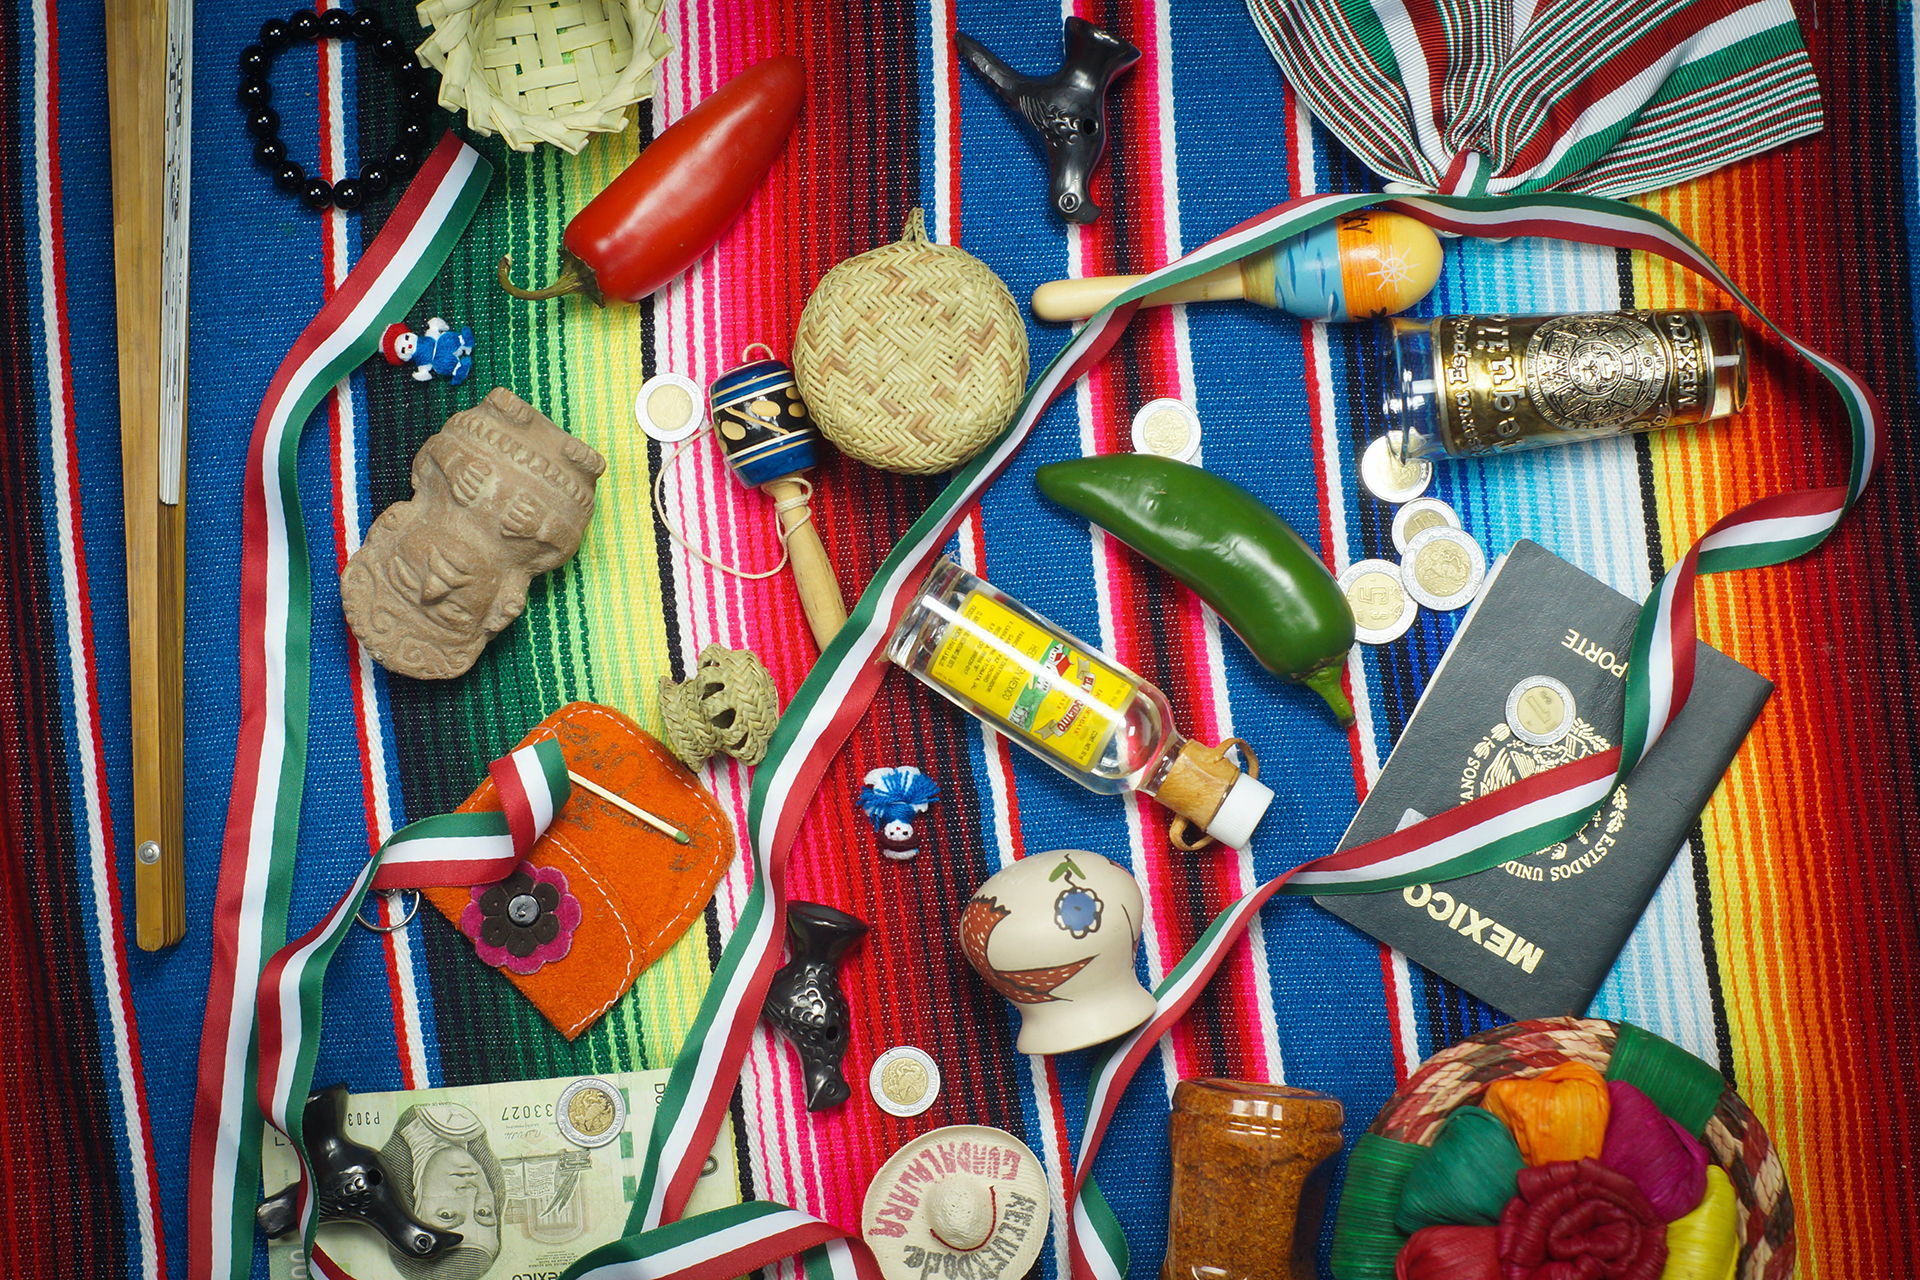 Mexican blanket with peppers, passport, maracas and various items lying on top